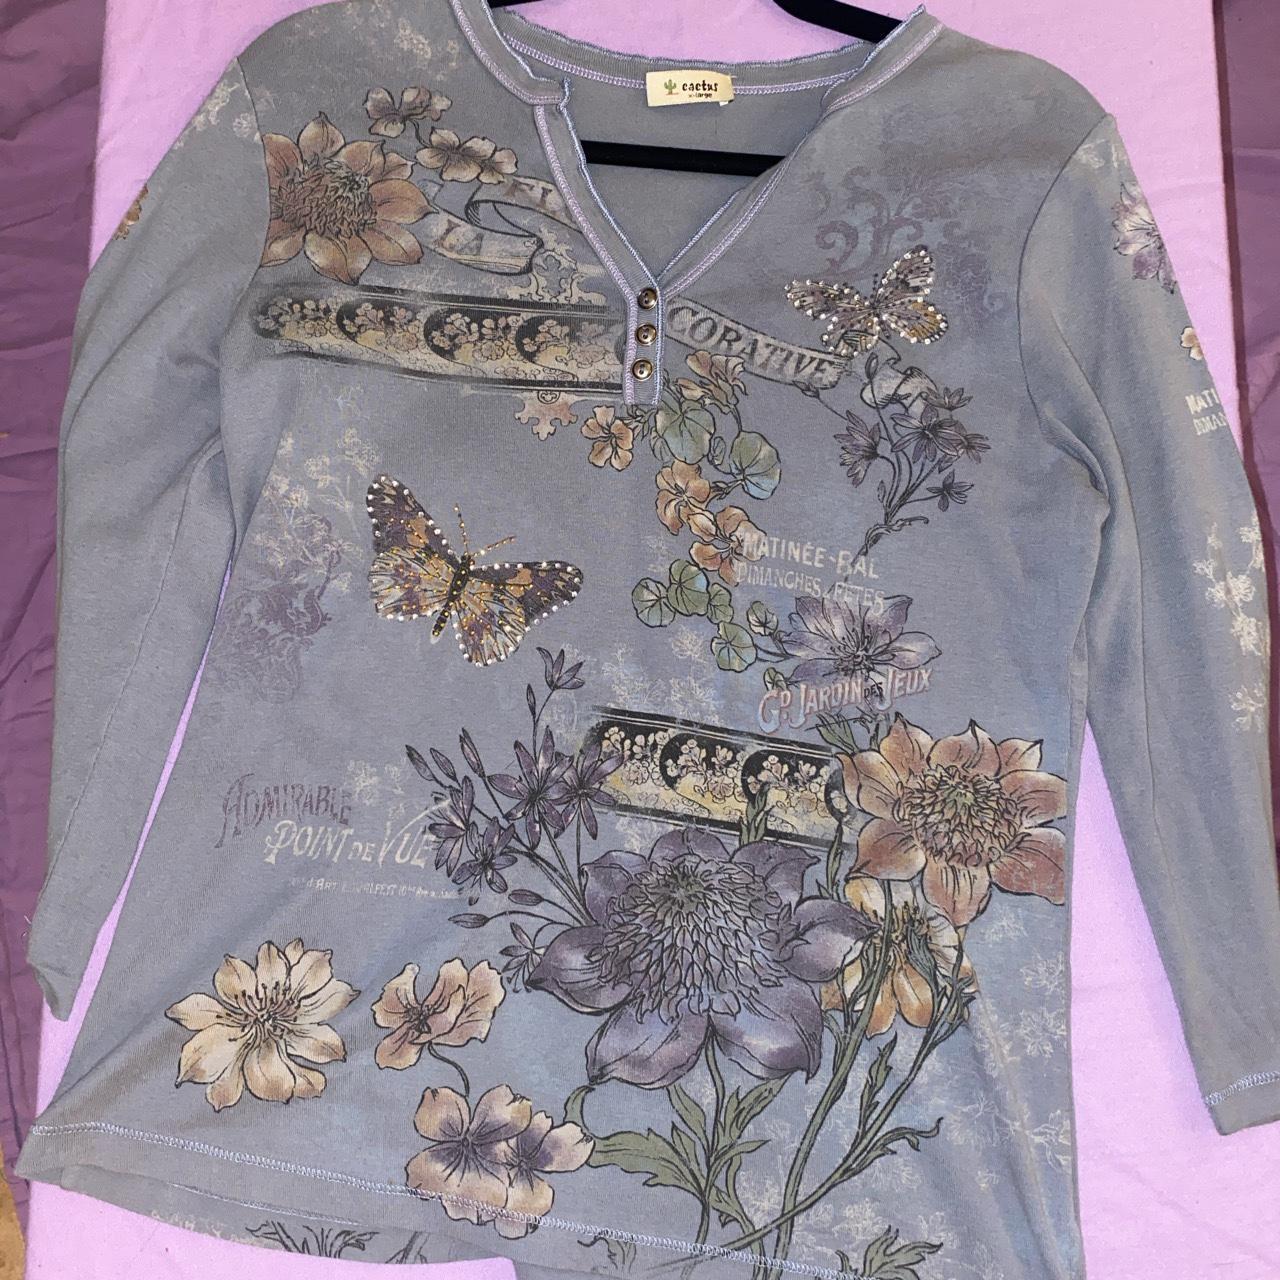 item listed by sisterthriftstore